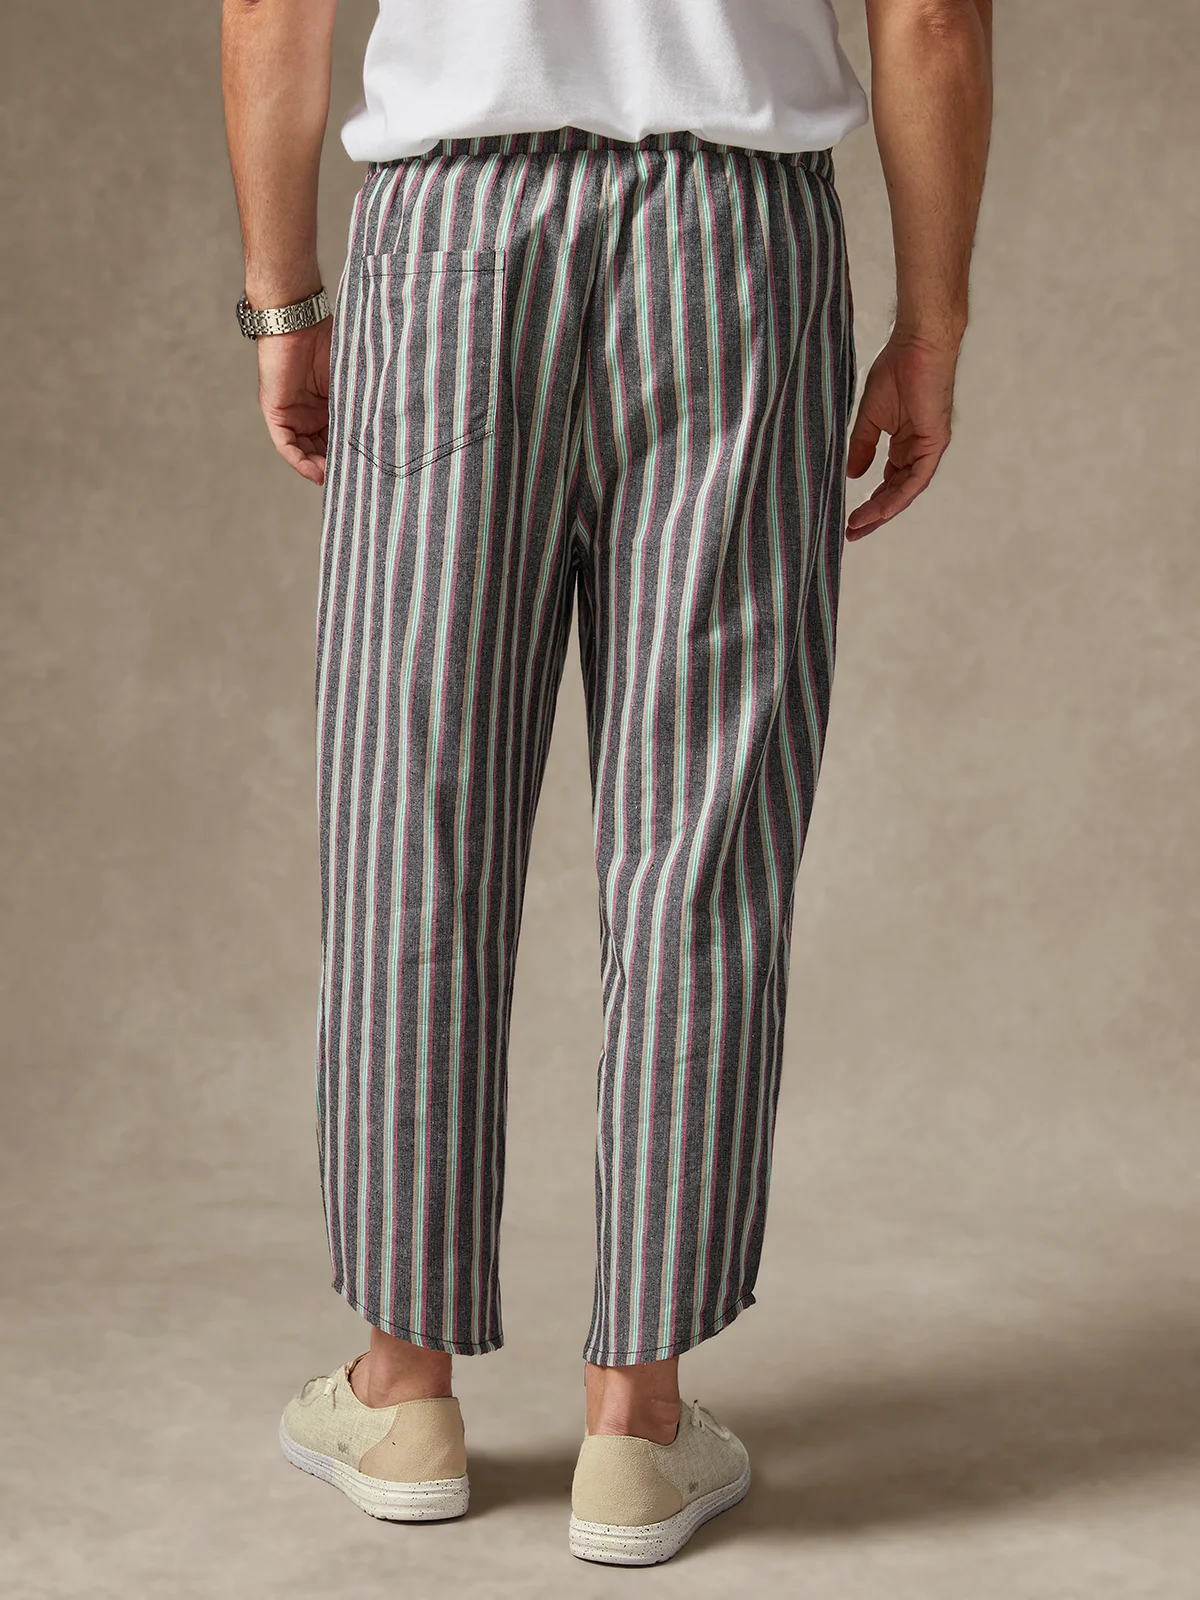 Hardaddy Cotton Striped Casual Cropped Pants